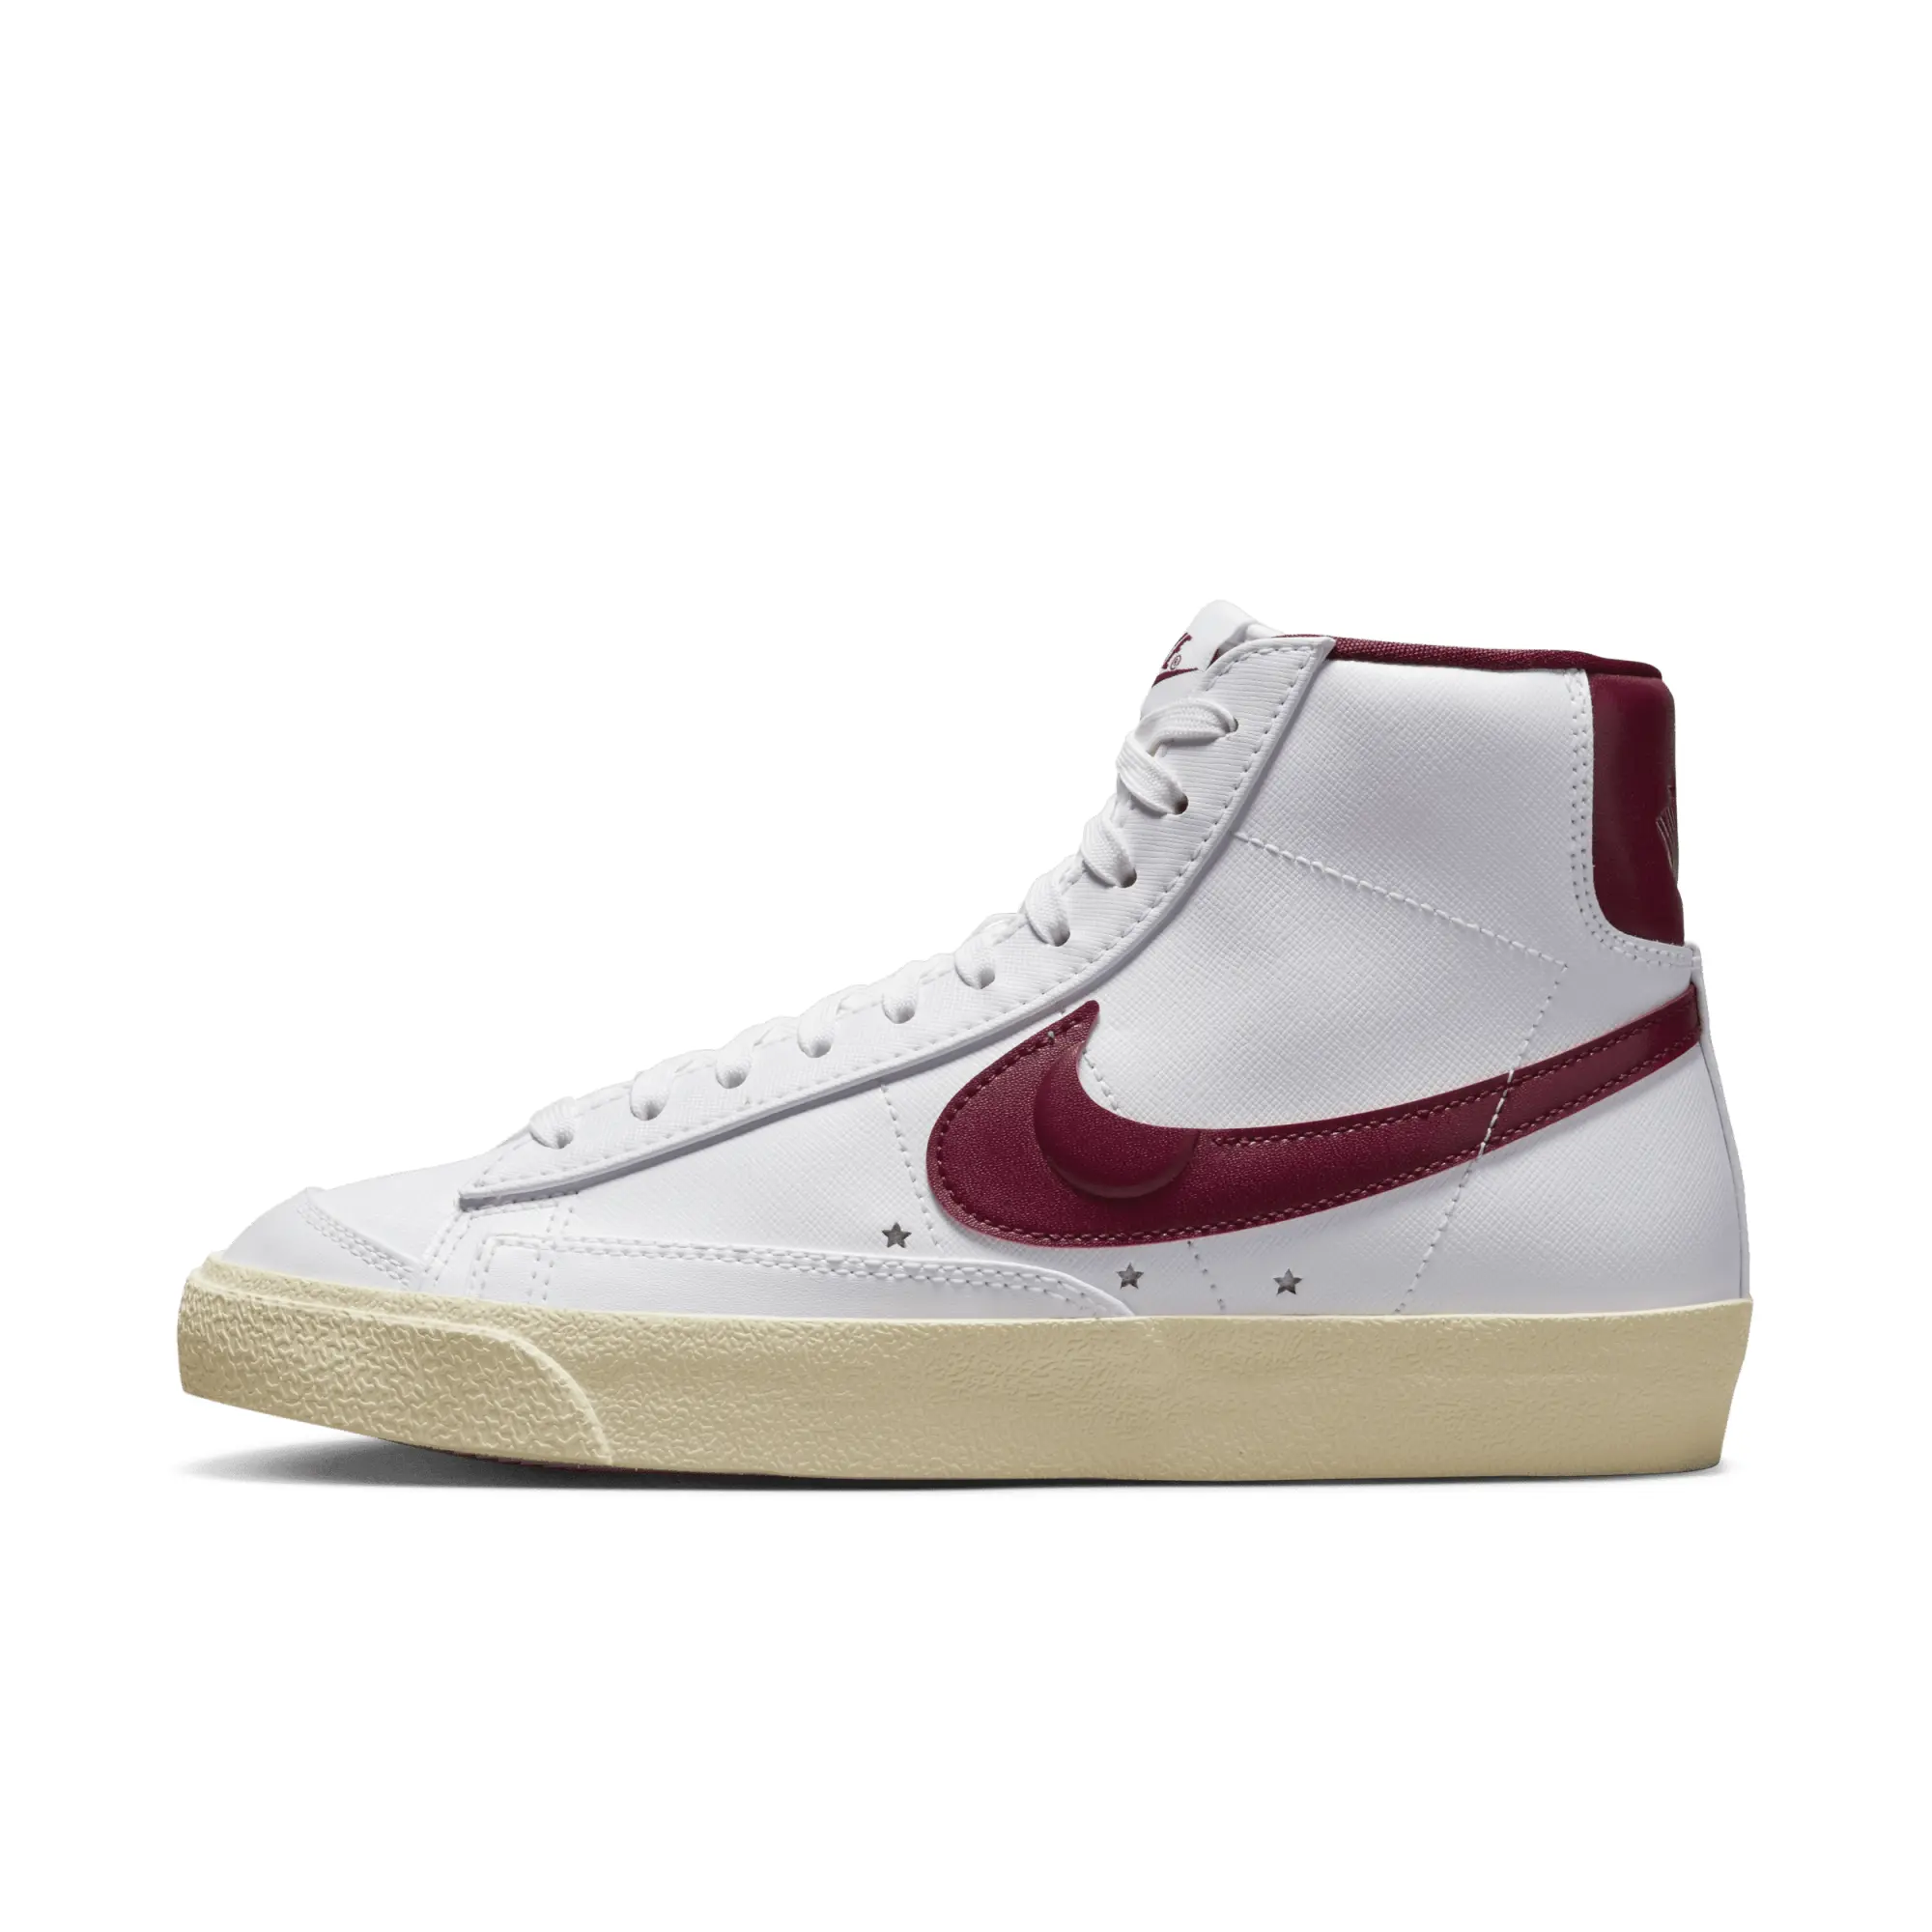 Nike Blazer Mid '77 Trainers In White And Burgundy